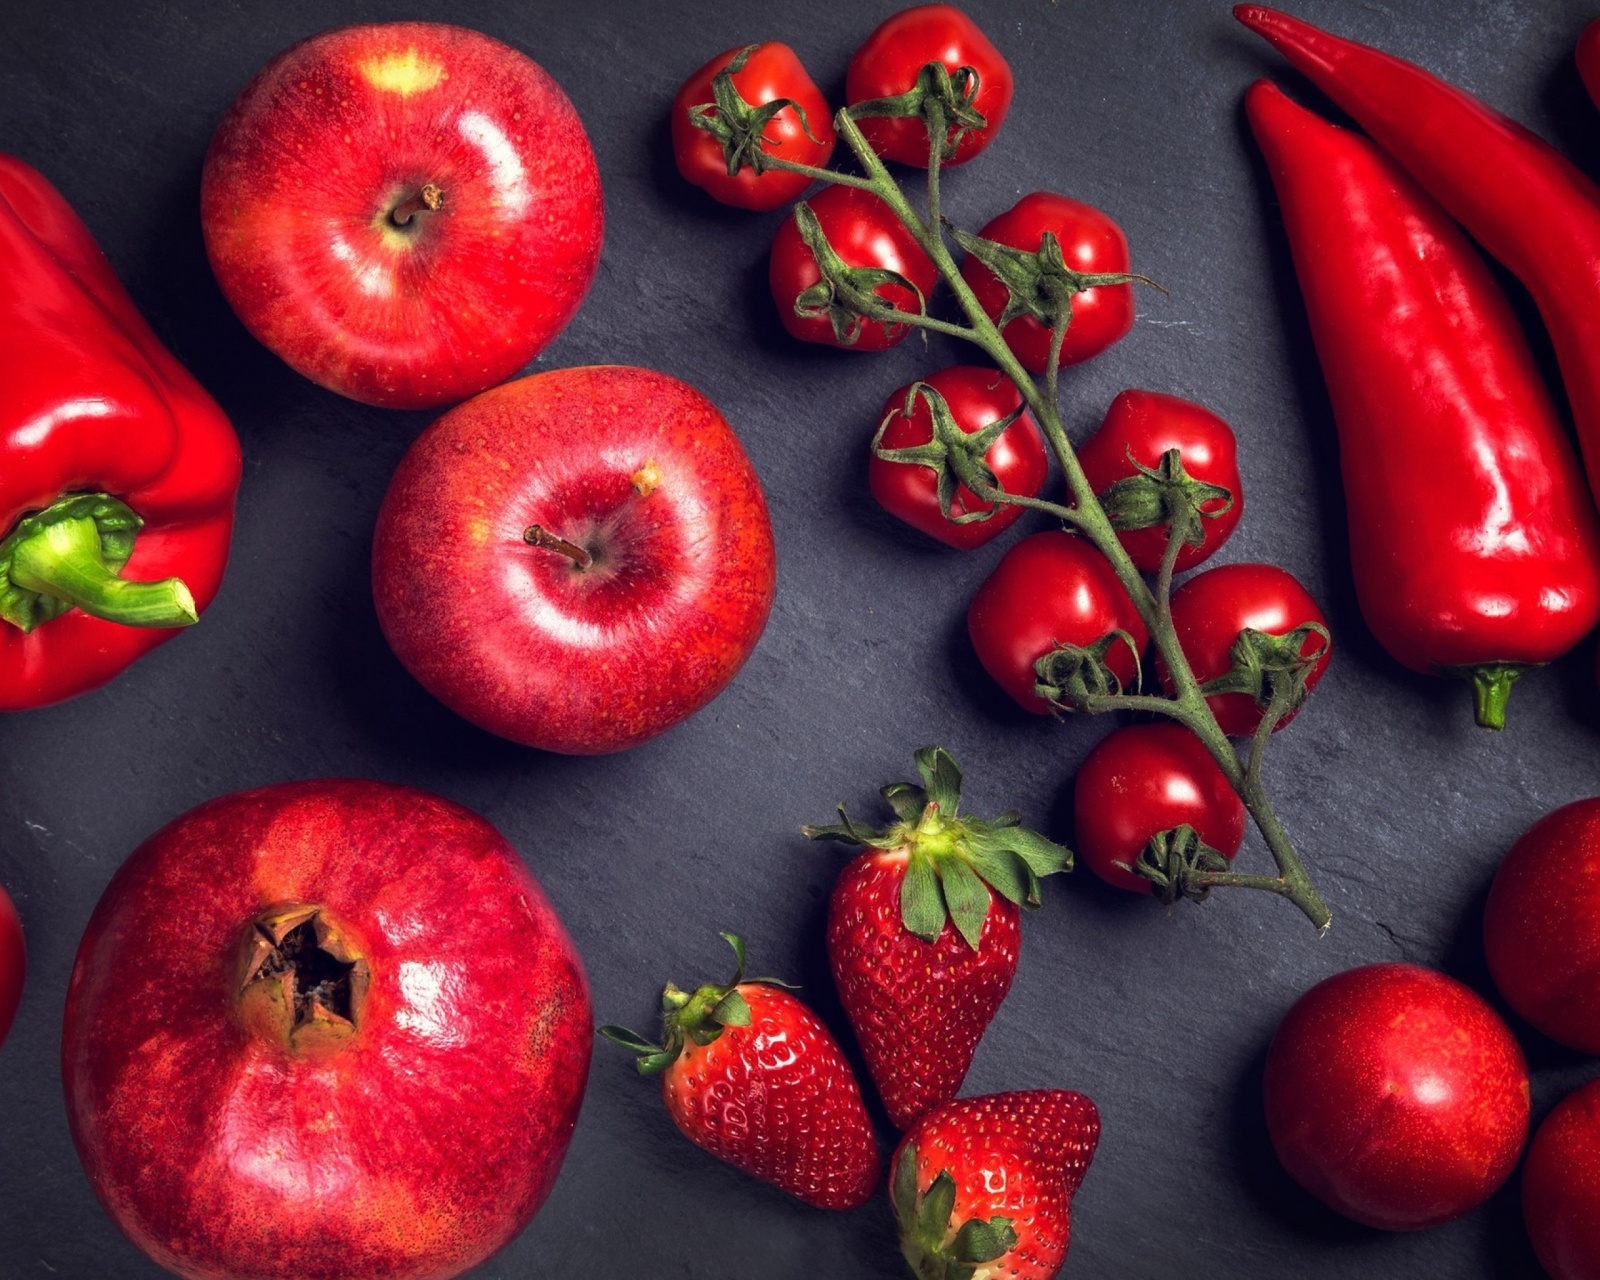 Red fruits and vegetables screenshot #1 1600x1280